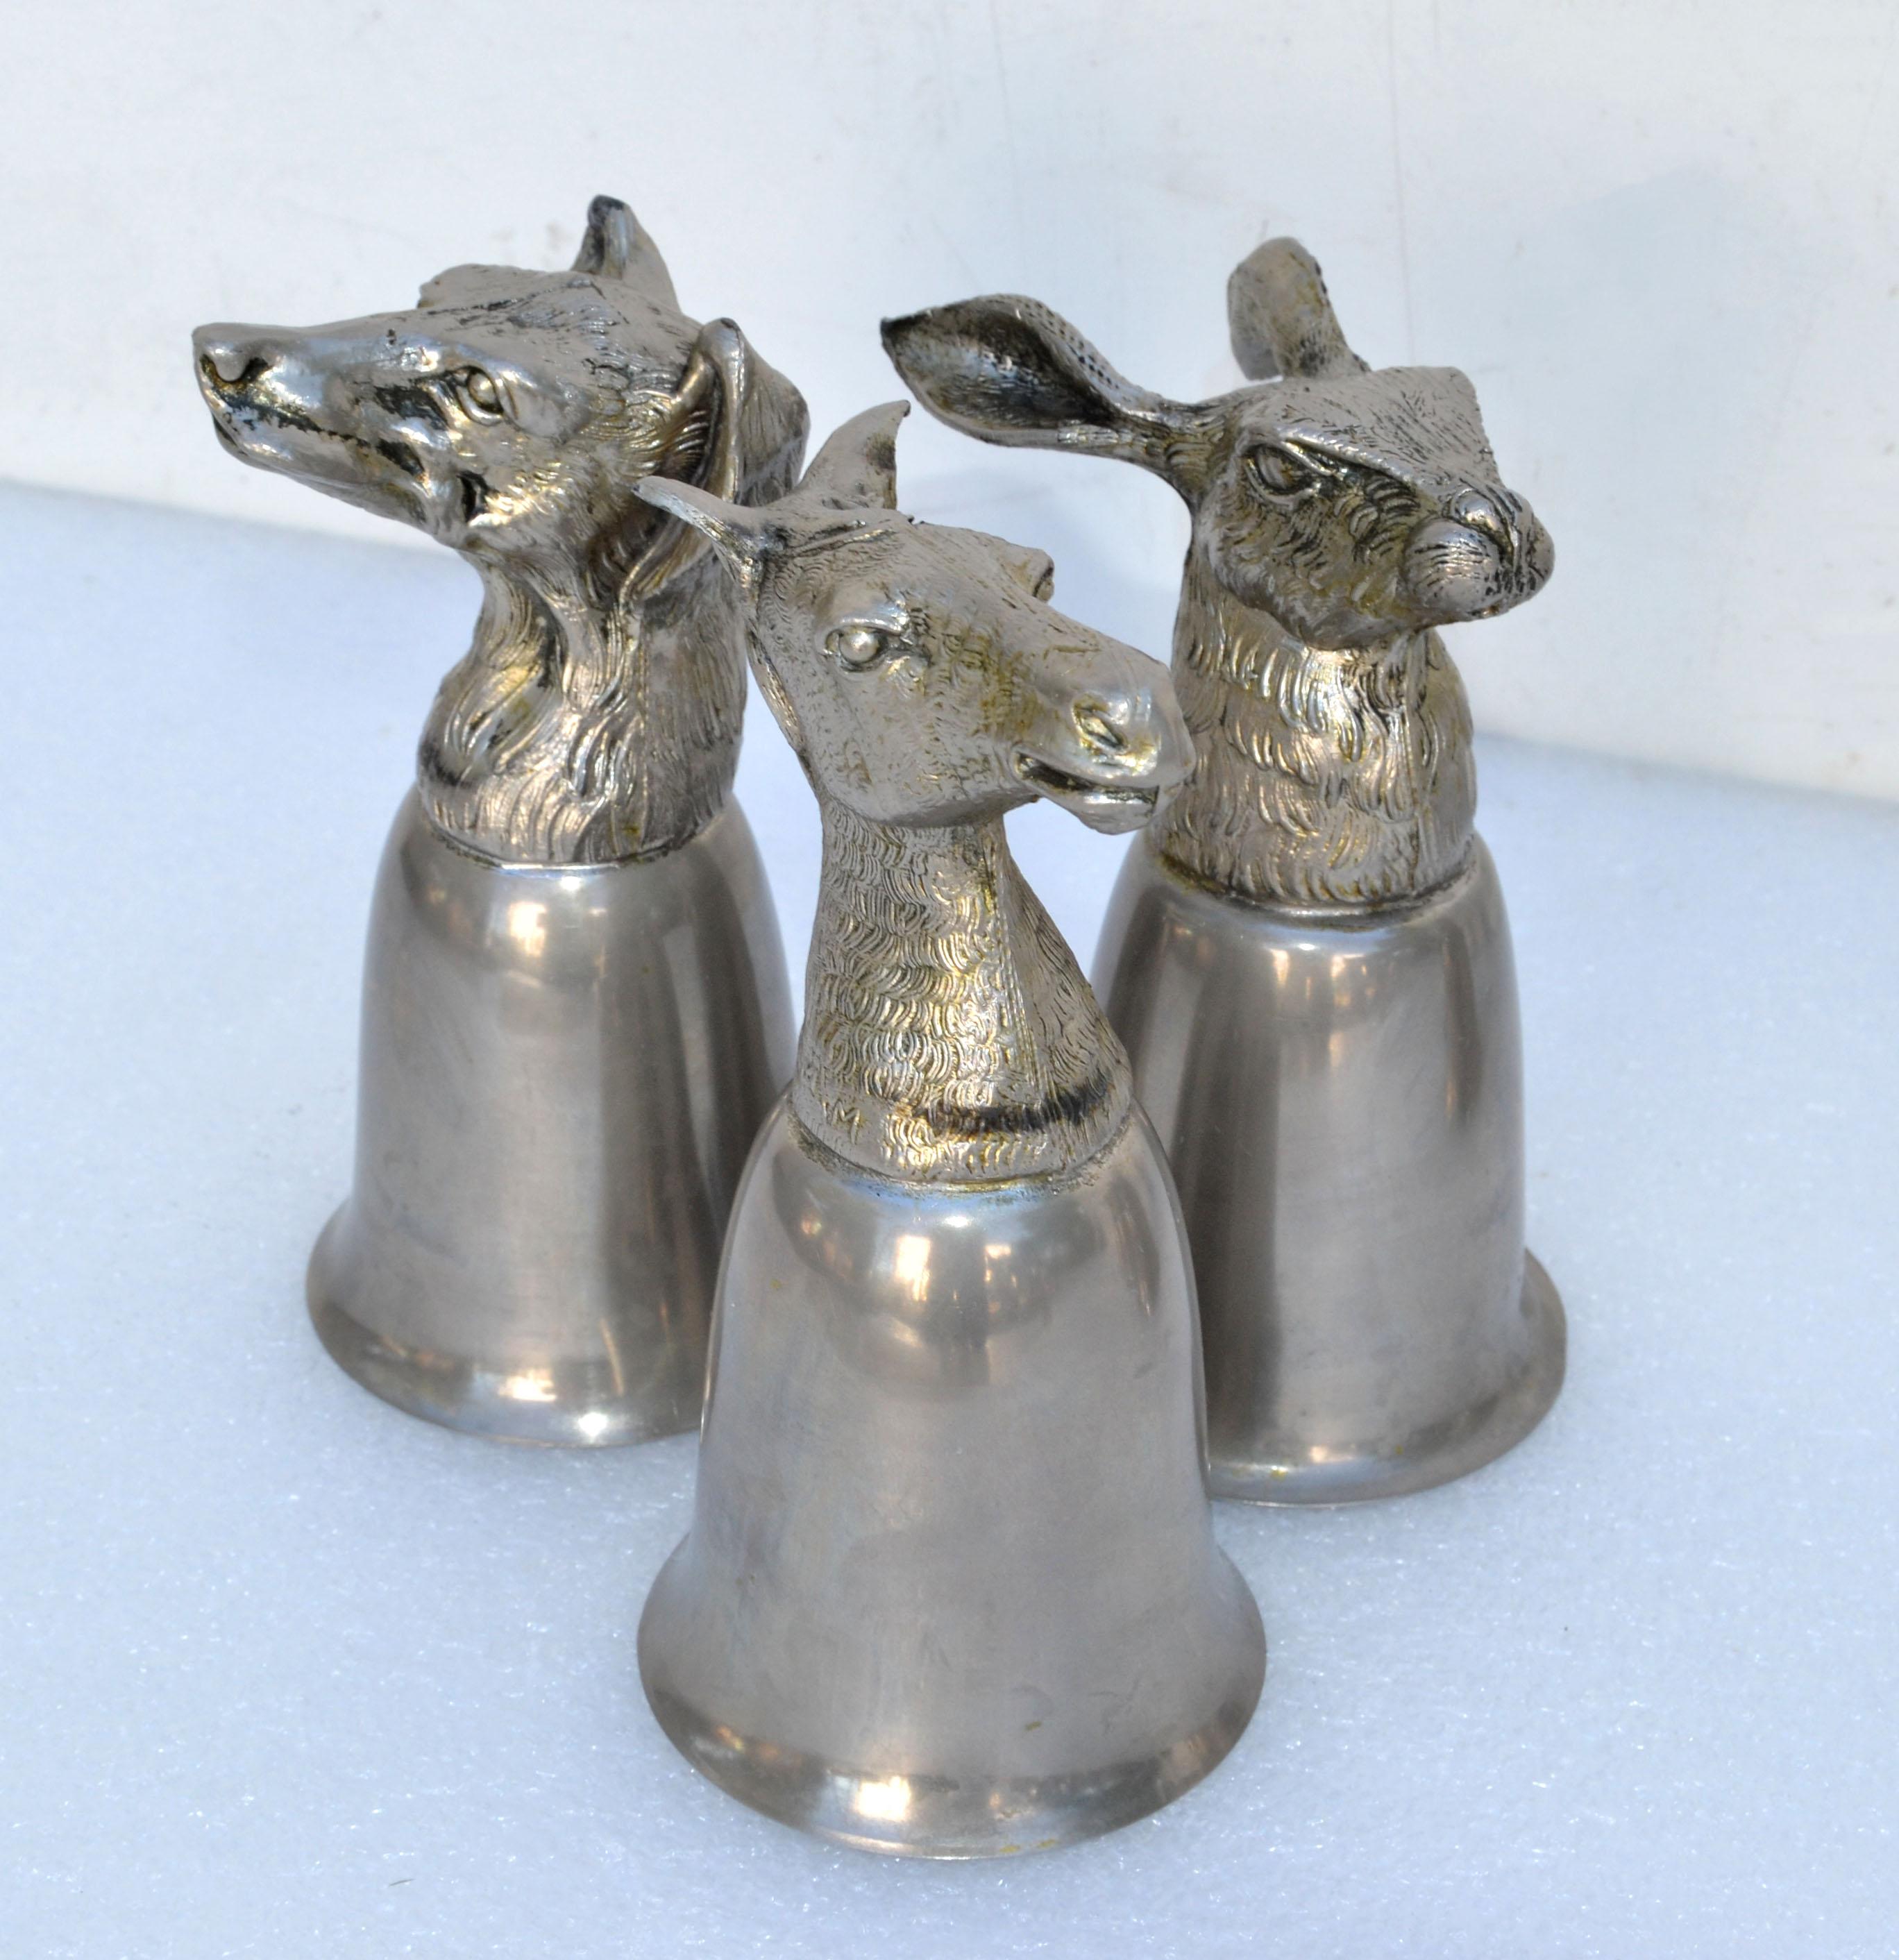 Hand-Crafted Six Mauro Manetti Silver Plate Animal Heads Stirrup Goblets Cups, Made in Italy